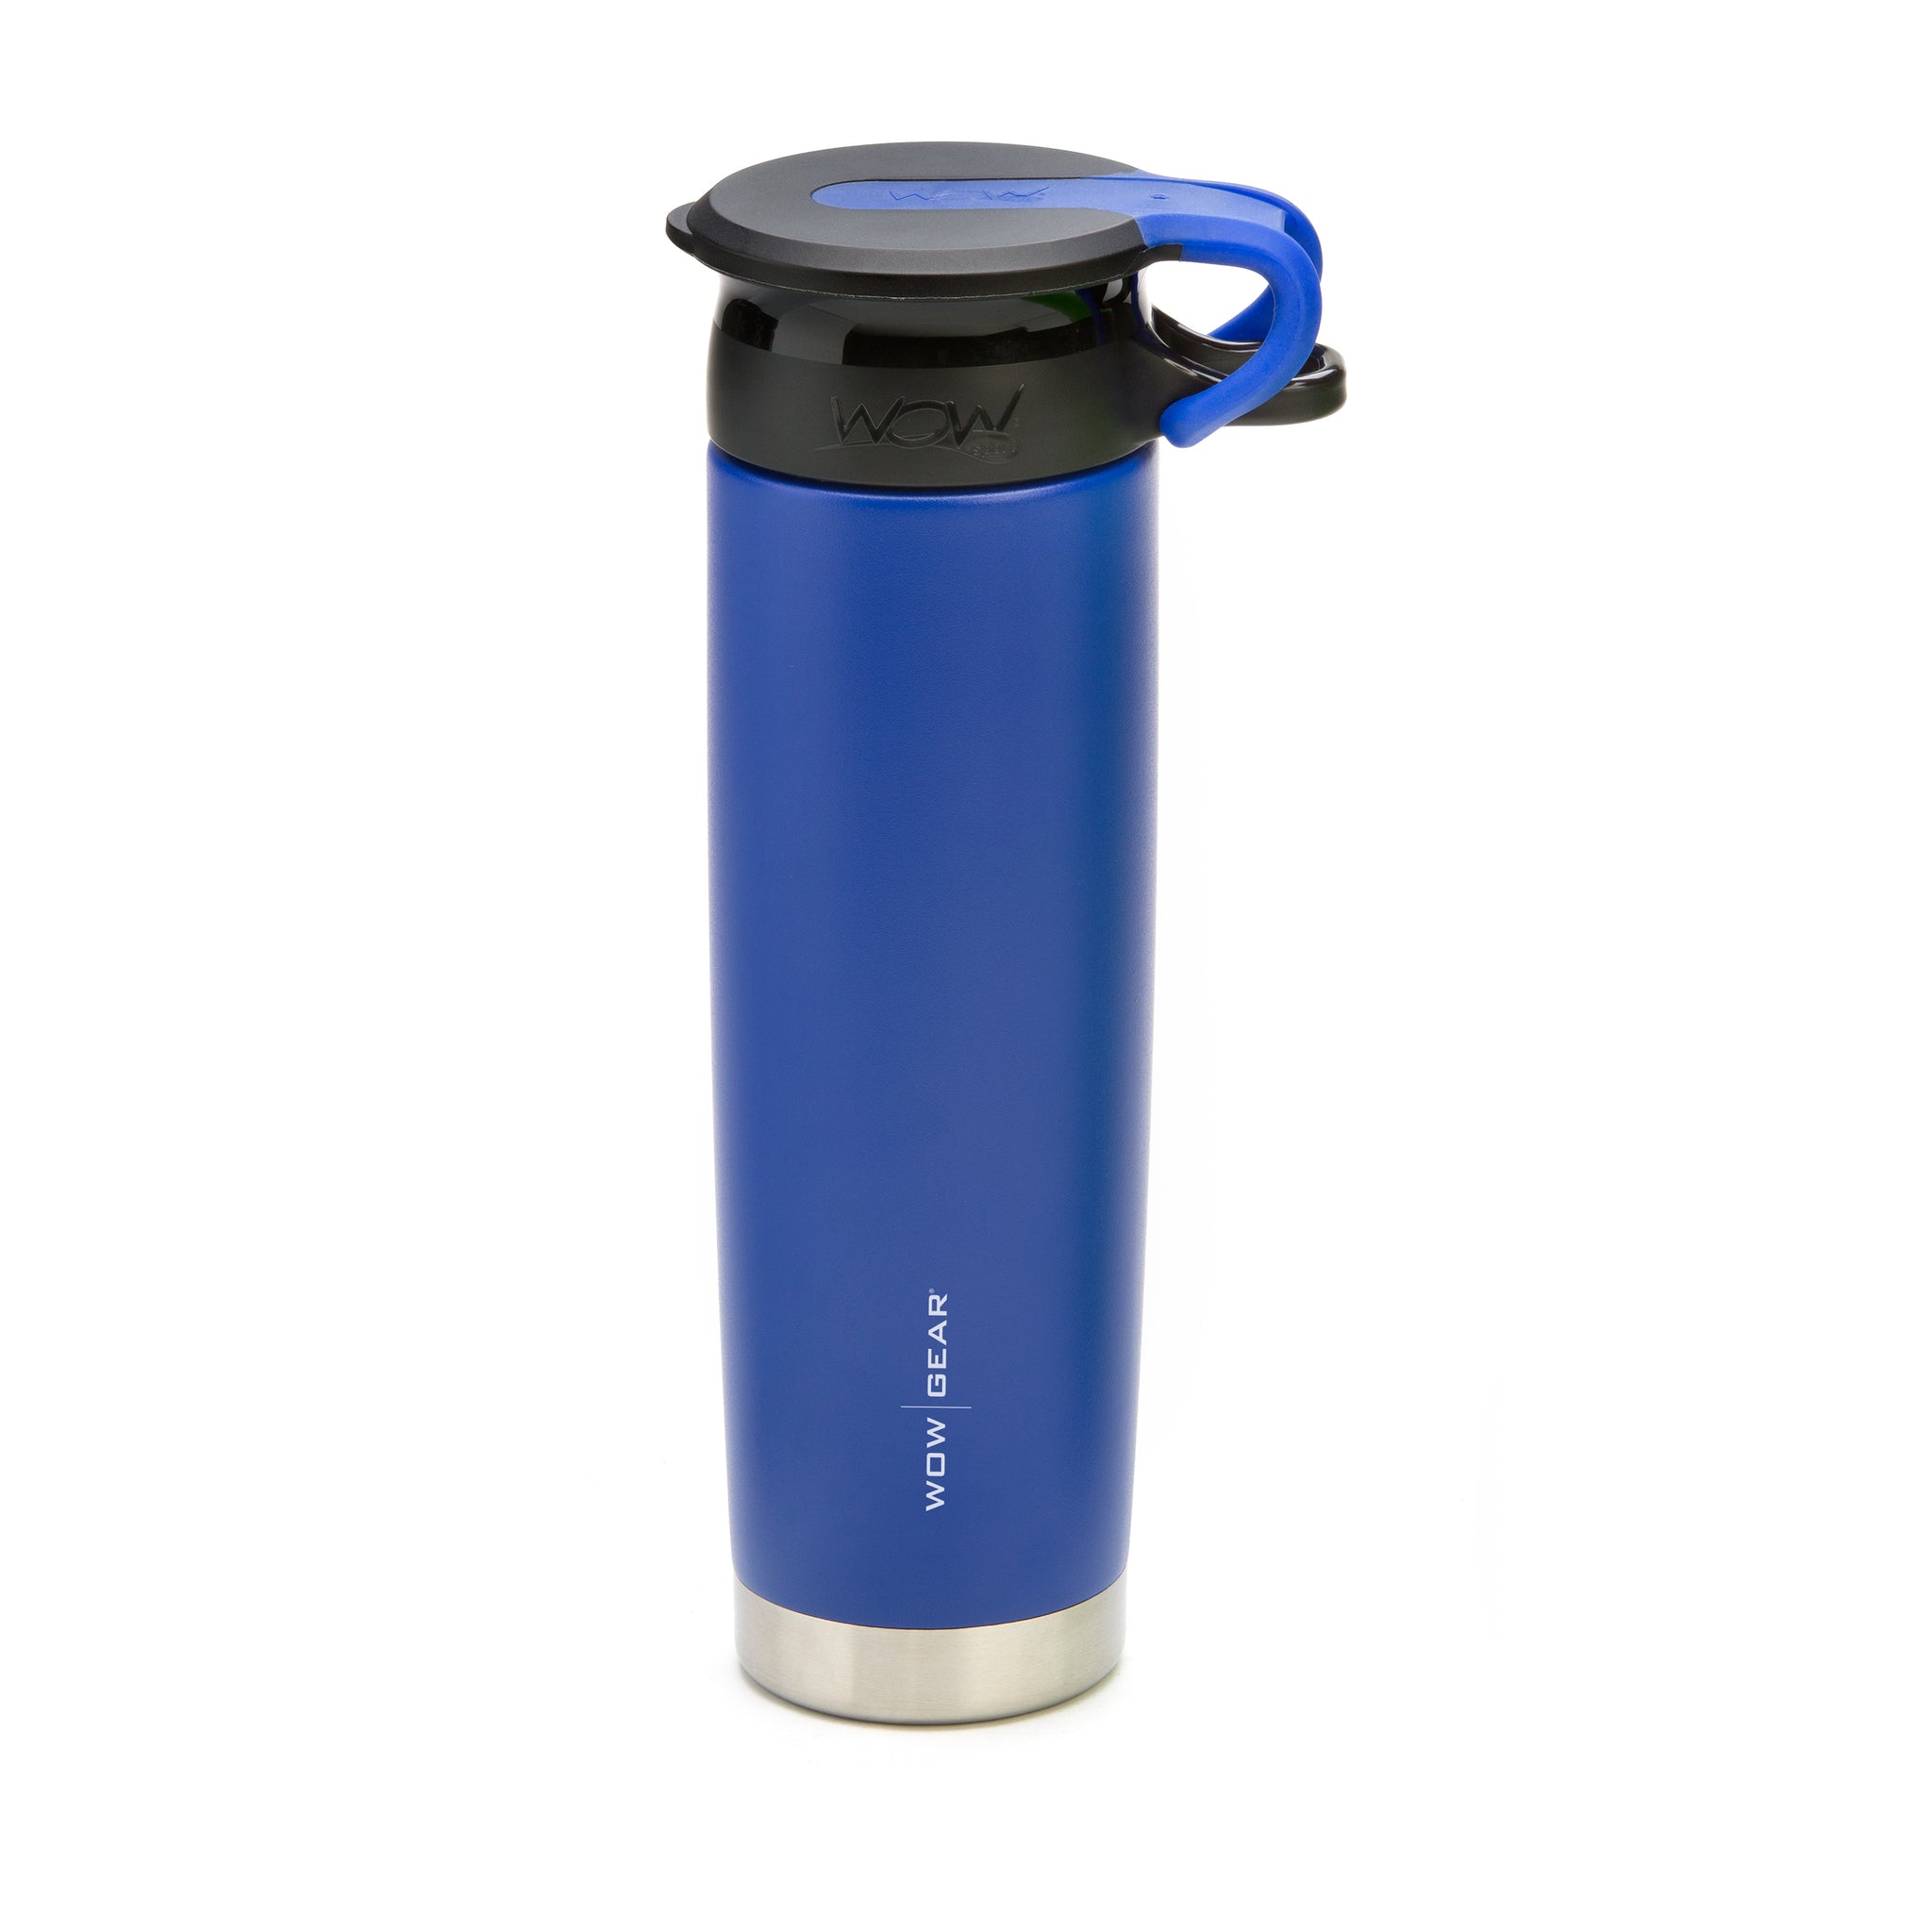 WOW GEAR 360° Double Walled Stainless Insulated Water Bottle - Blue, 2